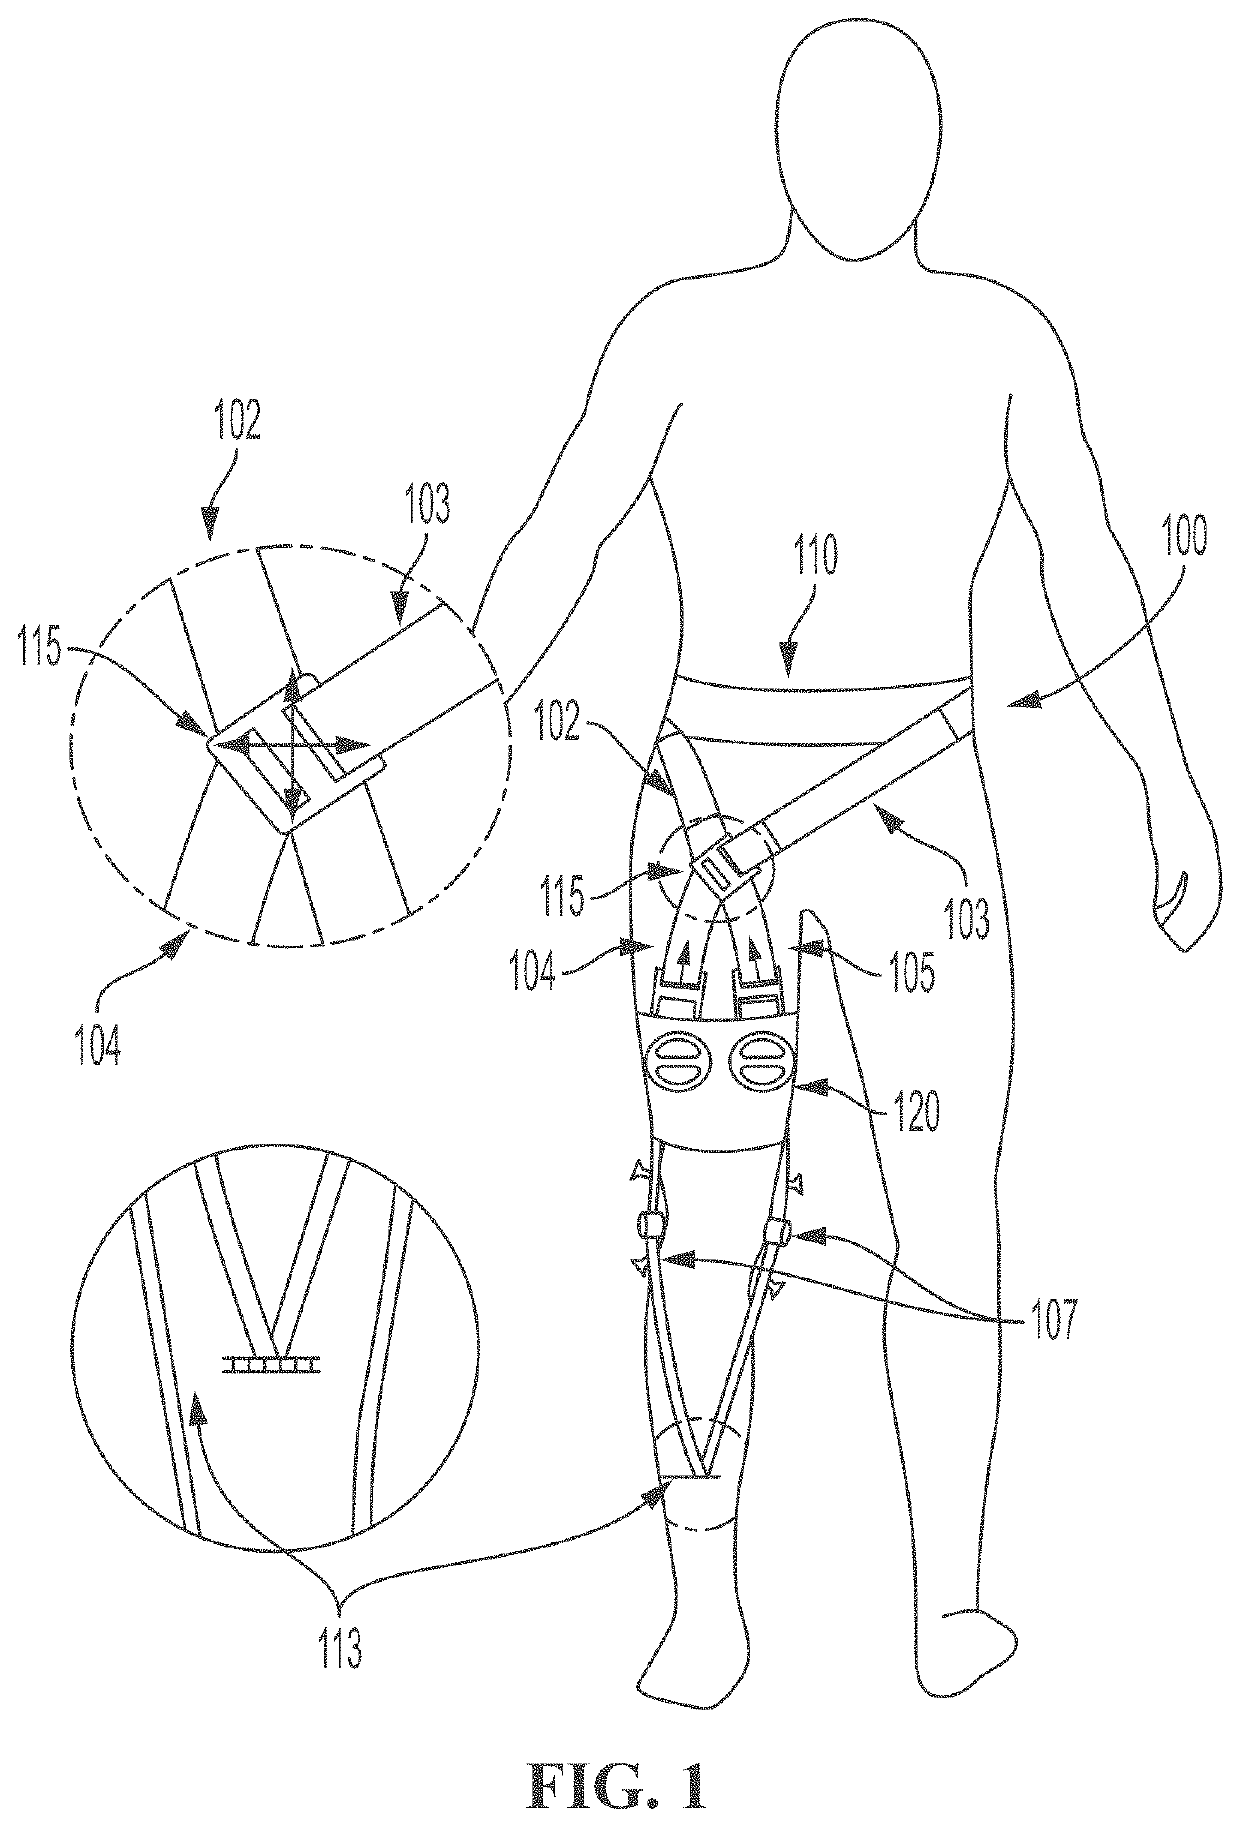 Soft exosuit for assistance with human motion